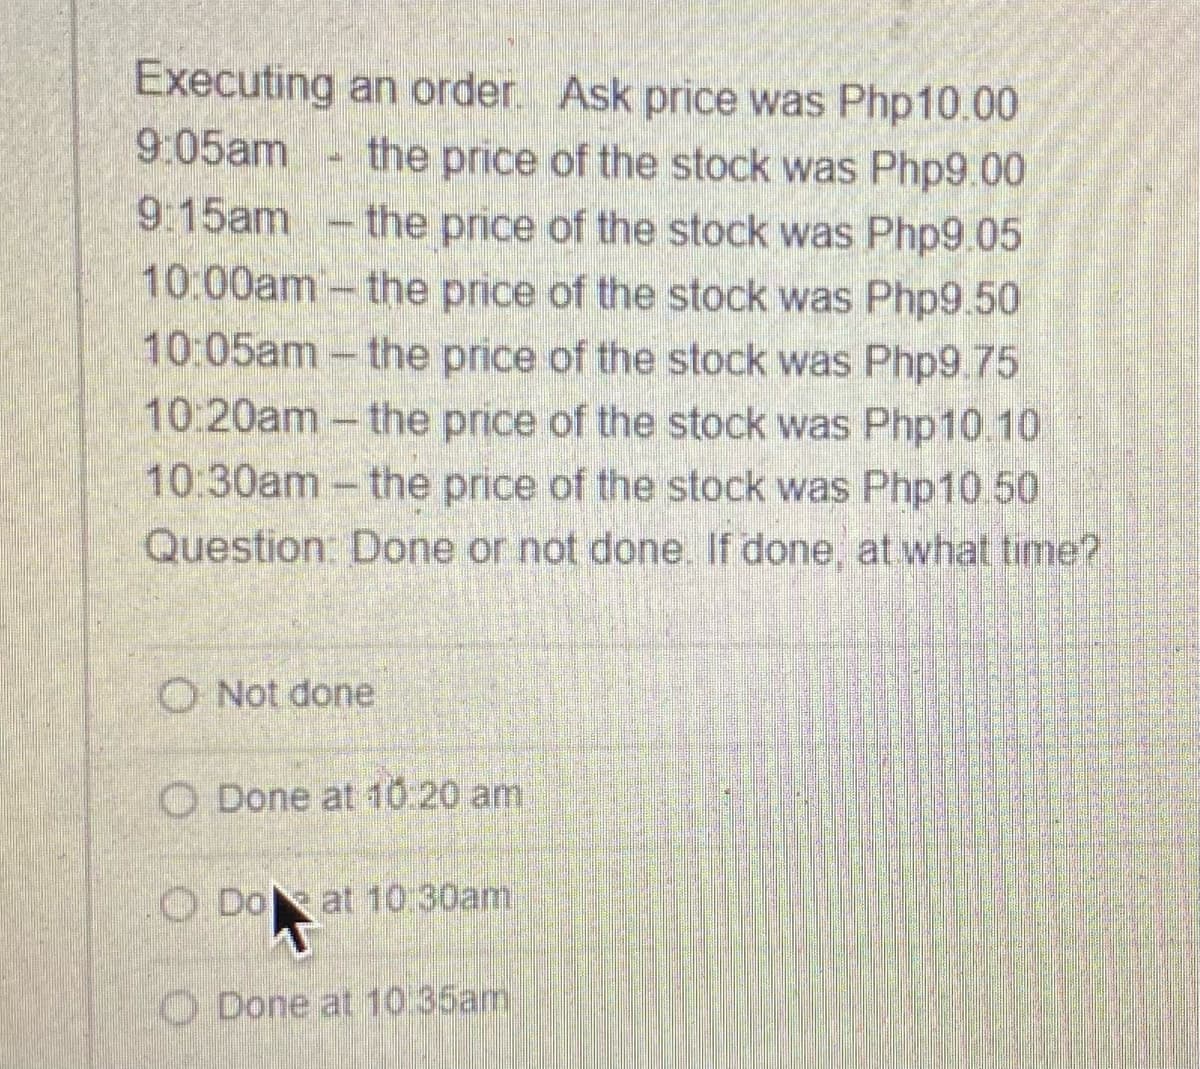 Executing an order Ask price was Php10.00
9:05am
the price of the stock was Php9.00
9 15am
the price of the stock was Php9.05
10:00am- the price of the stock was Php9.50
10:05am-the price of the stock was Php9.75
10:20am-the price of the stock was Php10.10
10:30am- the price of the stock was Php10 50
Question: Done or not done. If done, at what time?
O Not done
O Done at 10:20 am
O Doat 10:30am
O Done at 10 35am
